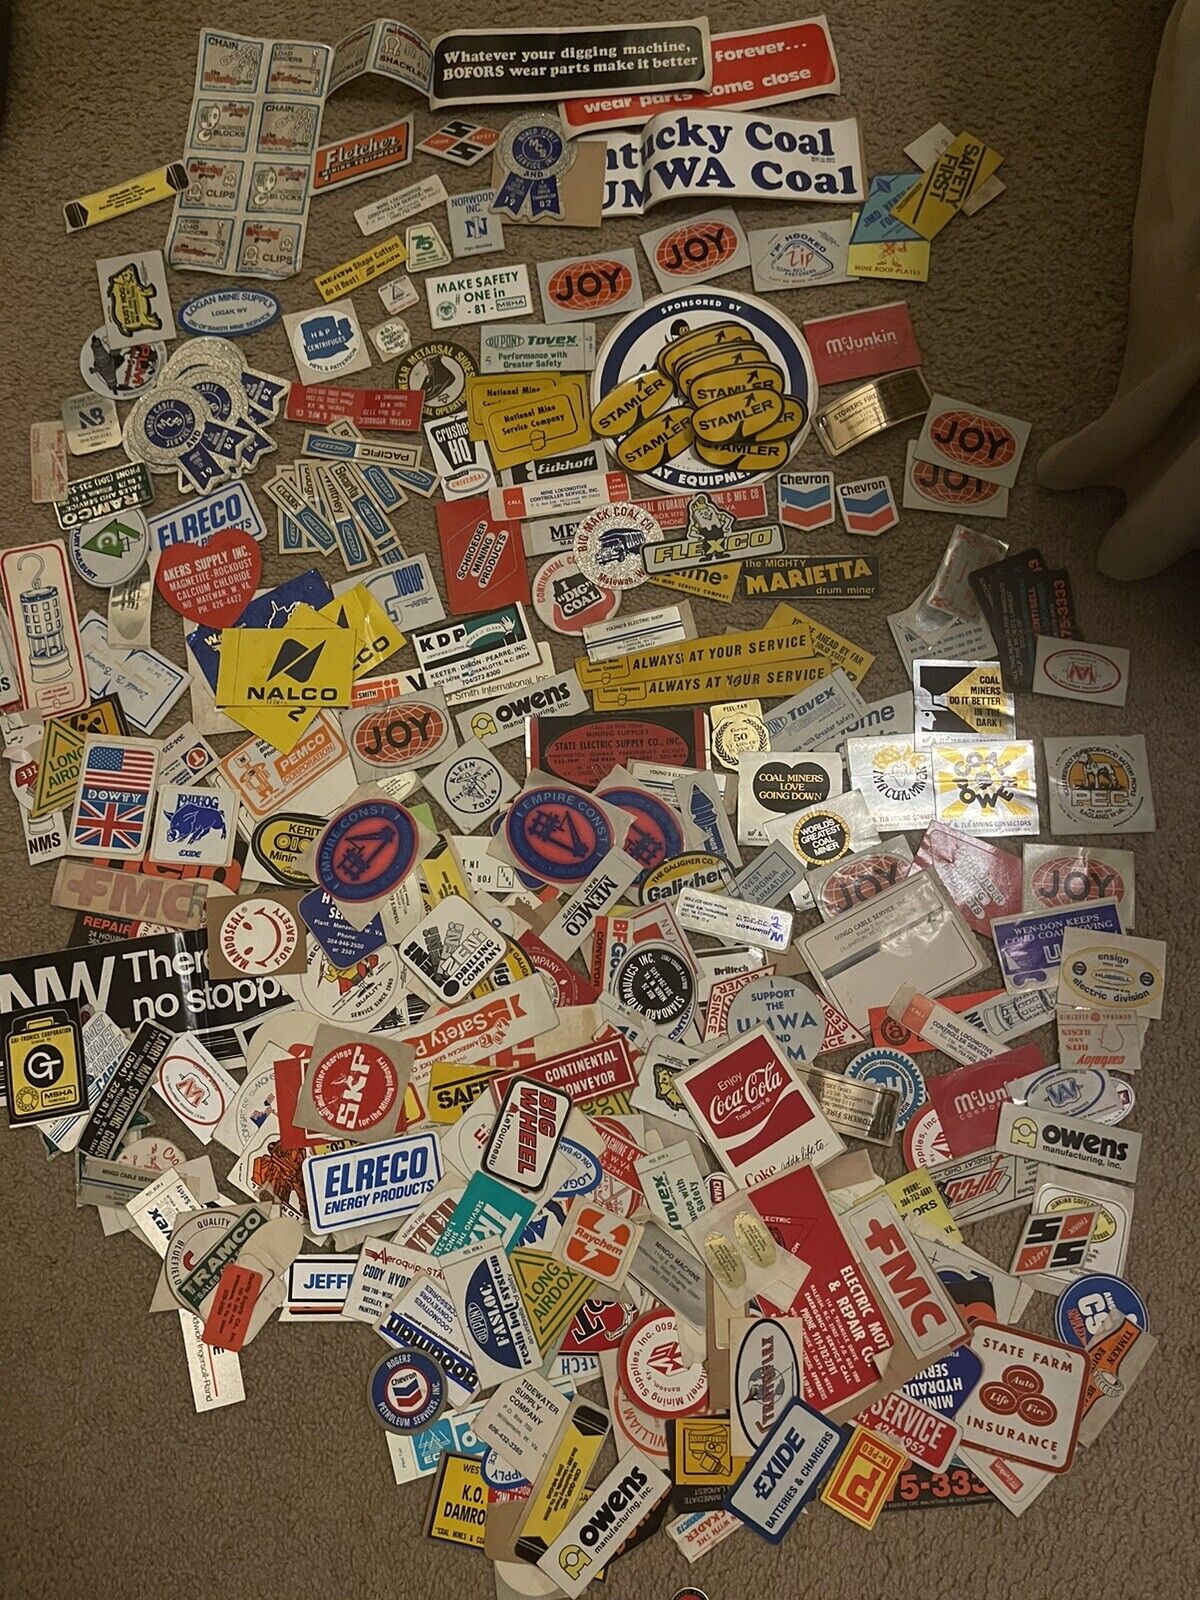 HUGE LOT OF 100s COAL MINING STICKERS Joy Vintage Stamler Coal Mines And More